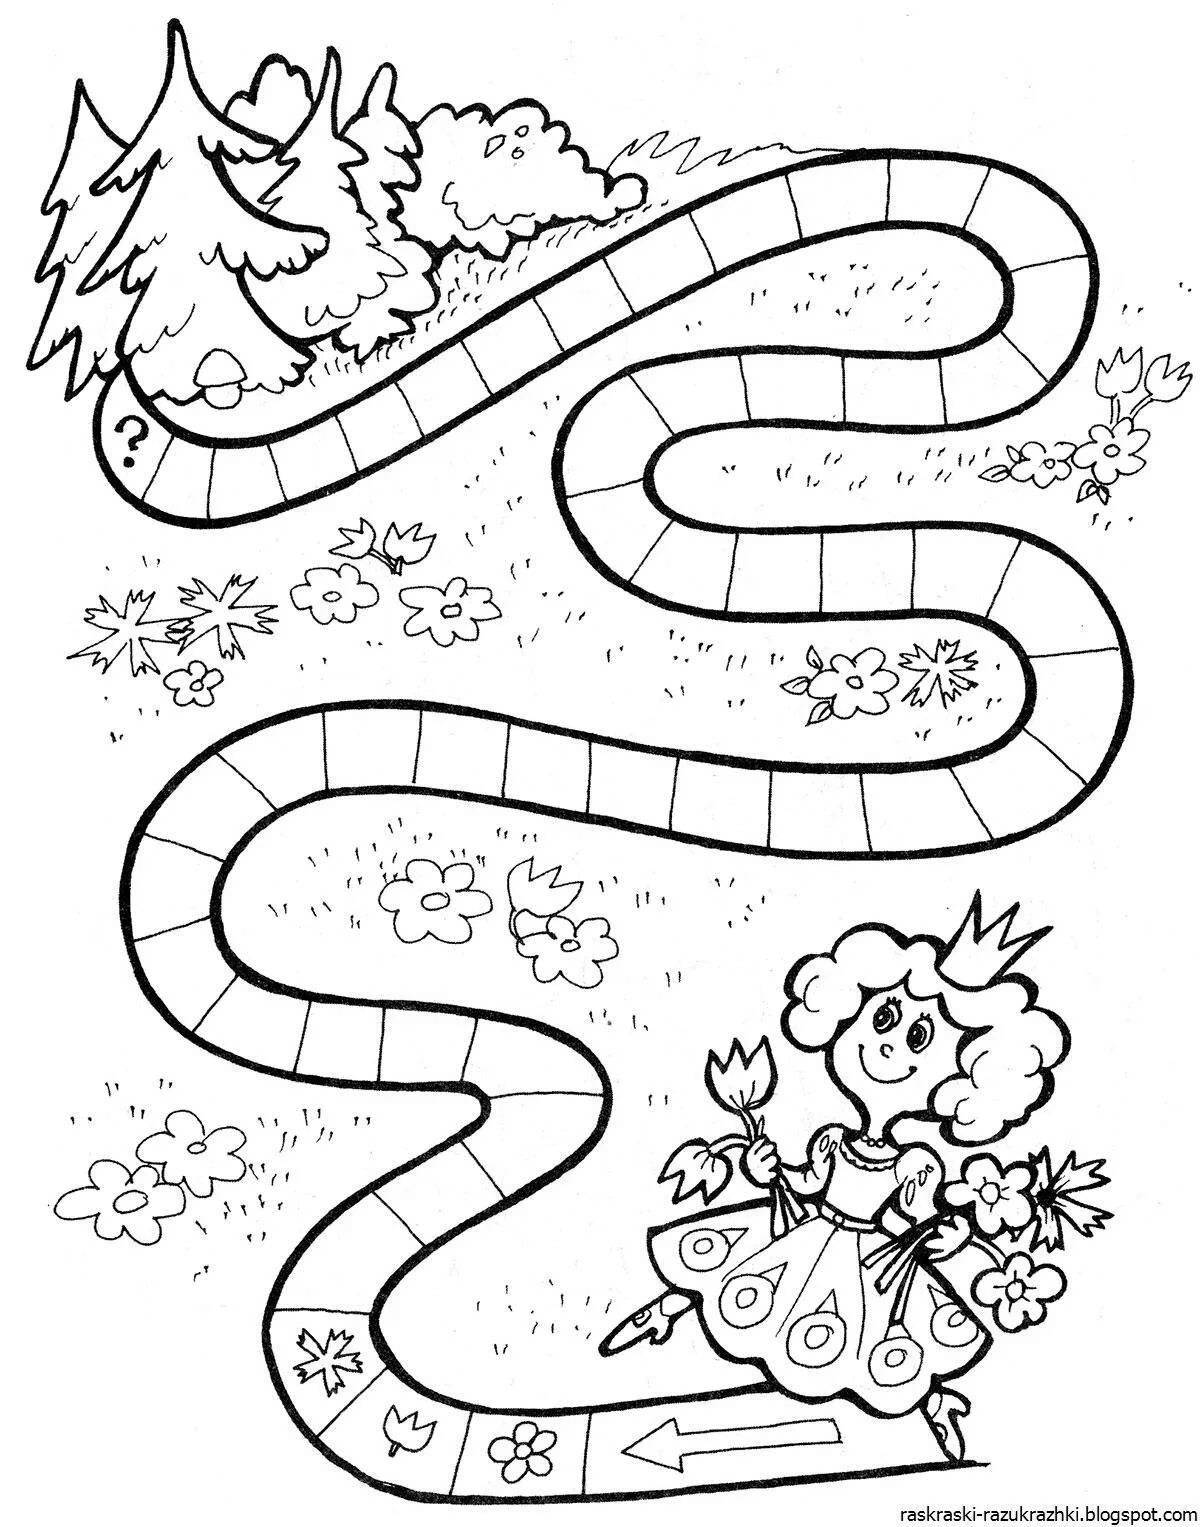 Fun coloring pages for kids aged 5+